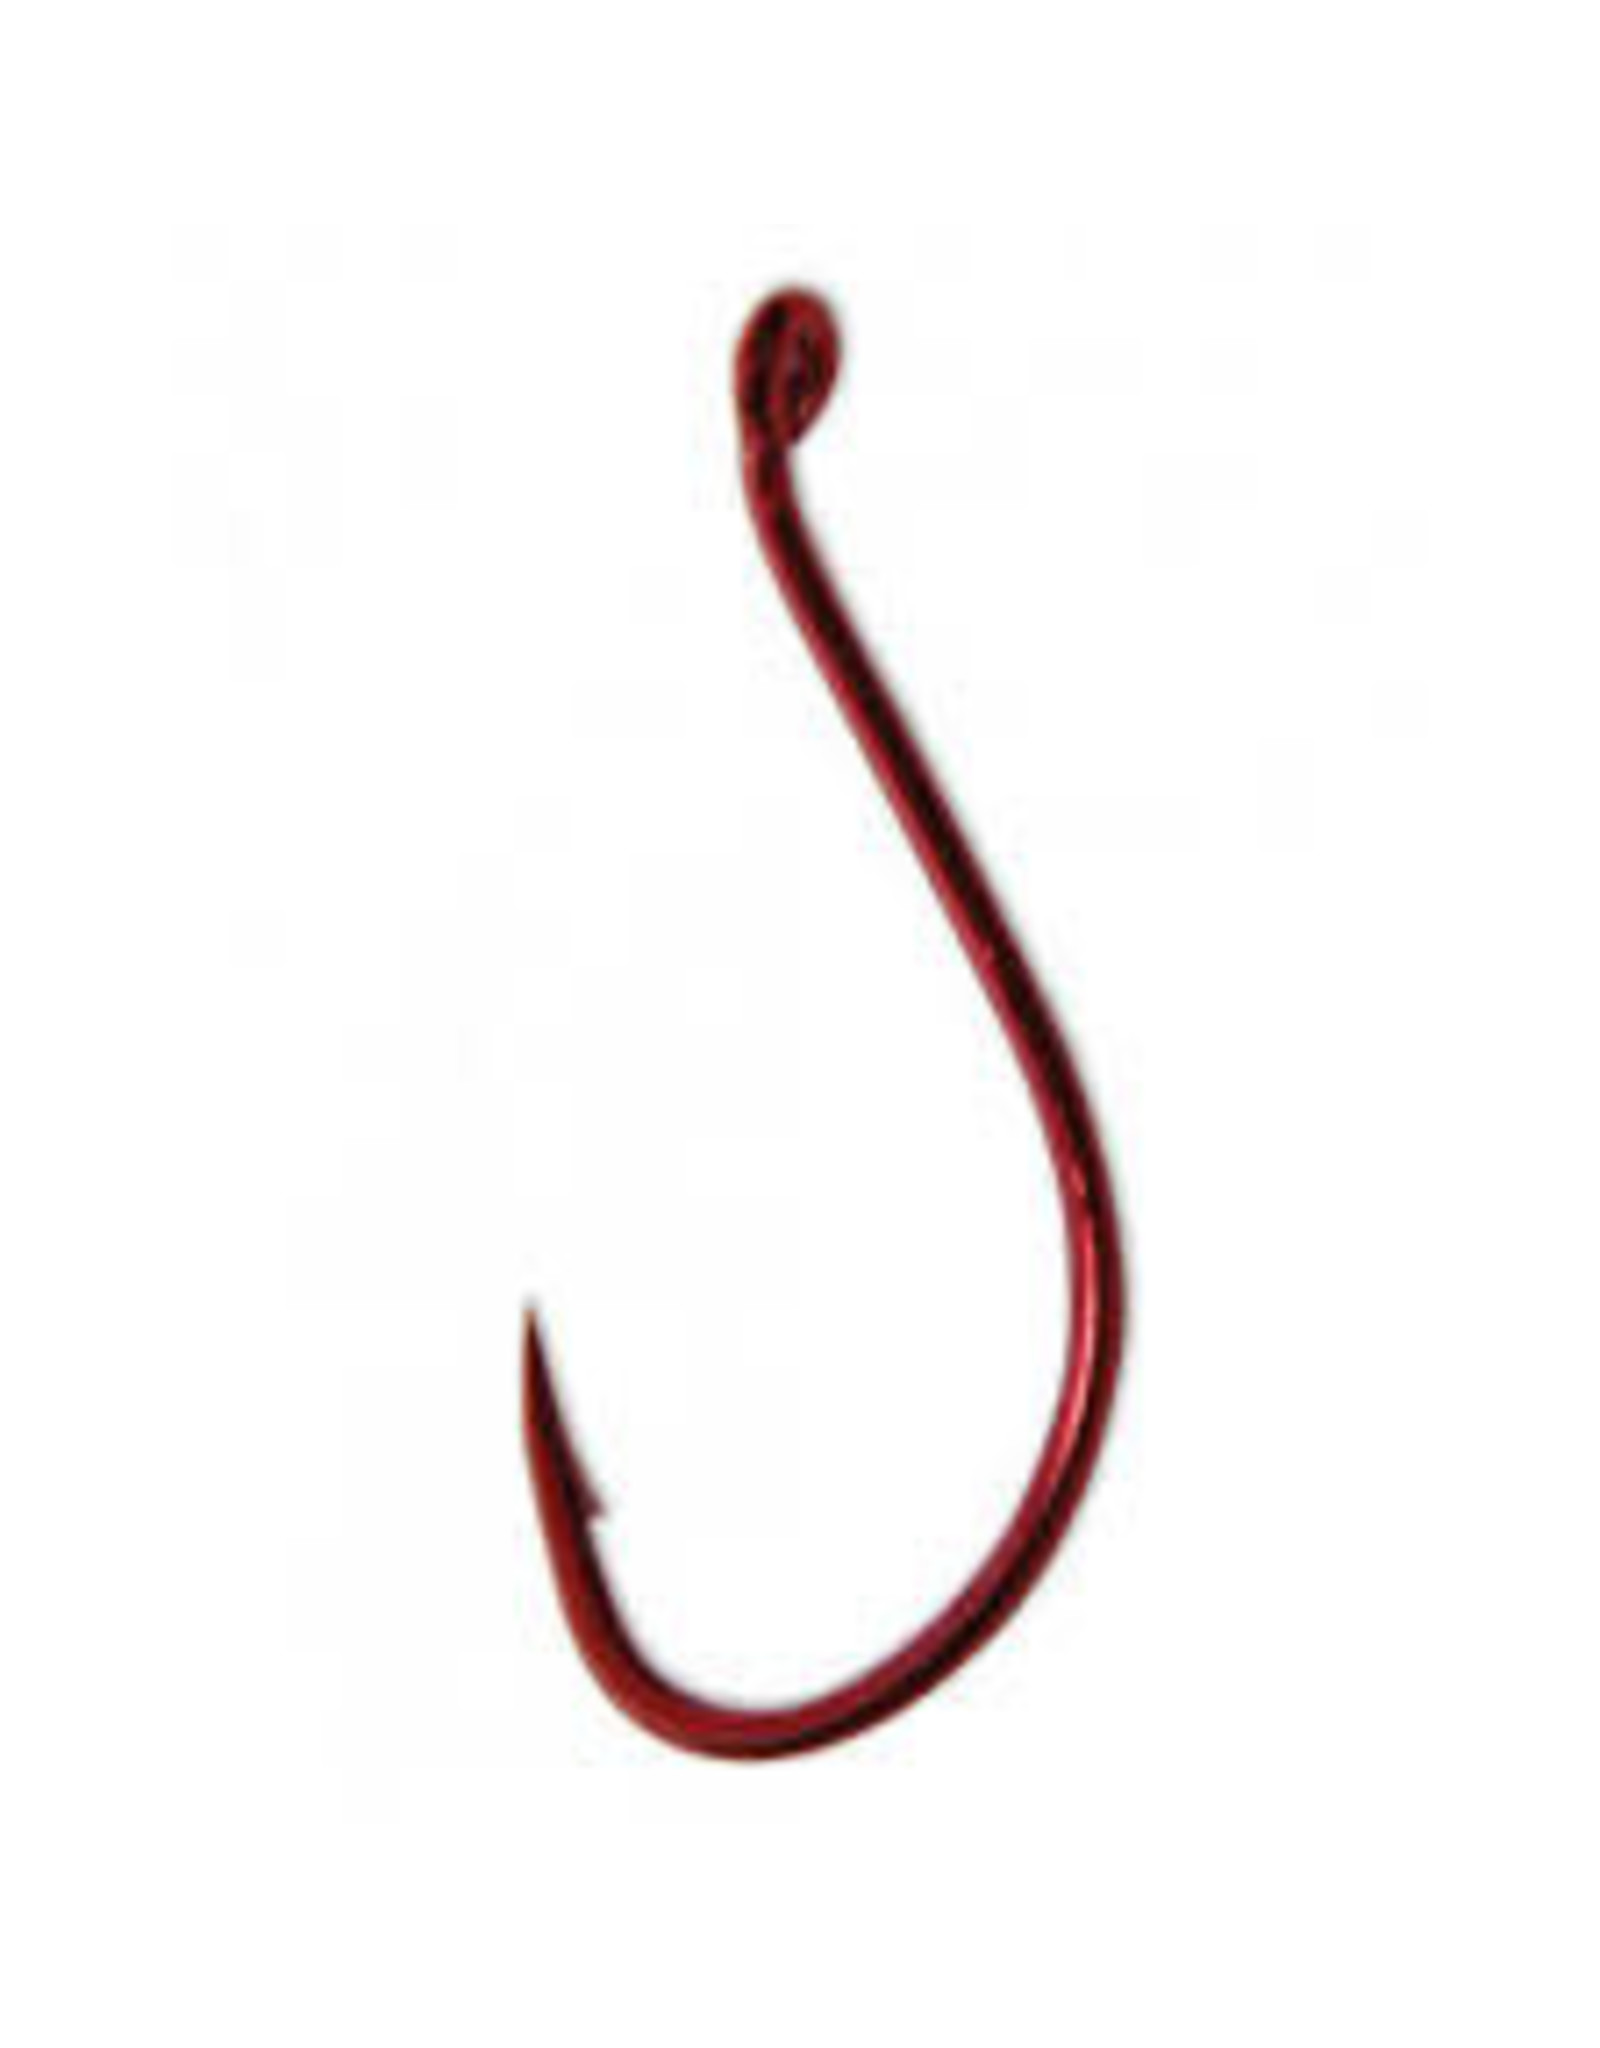 Gamakatsu 341309 Octopus Hook, Size 2, Needle Point, Light Wire, Offset,  Ringed Eye, Red, 8 per Pack (141108) - Bronson